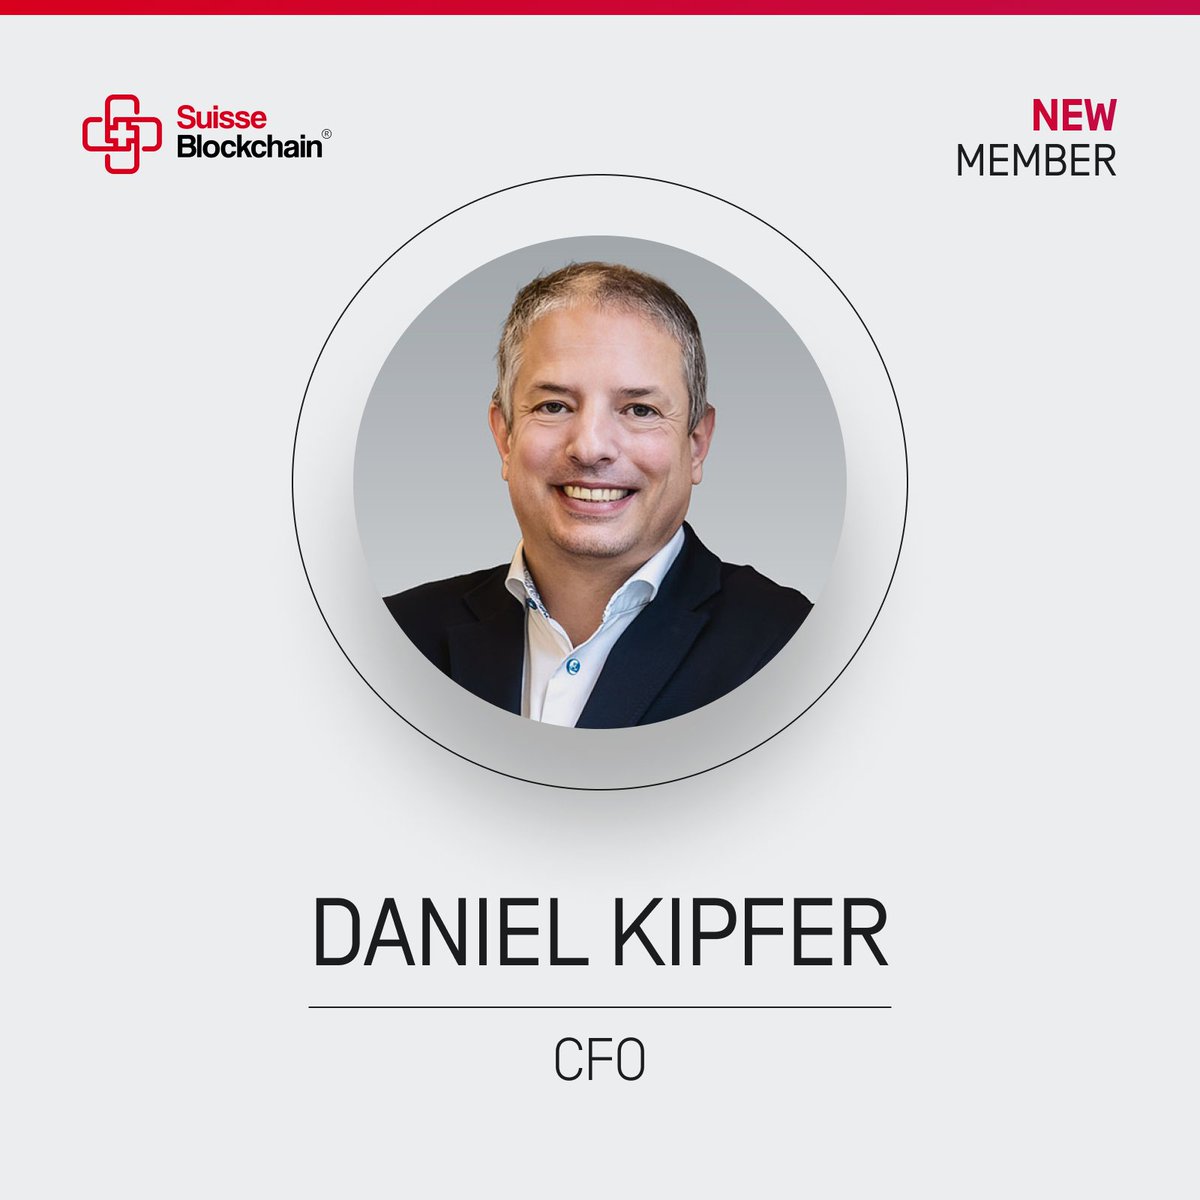 We're thrilled to welcome Daniel Kipfer as our new CFO at Suisse Blockchain! With 14+ years in banking and 7+ in blockchain, his expertise is set to propel us forward. #Blockchain #FinanceLeadership